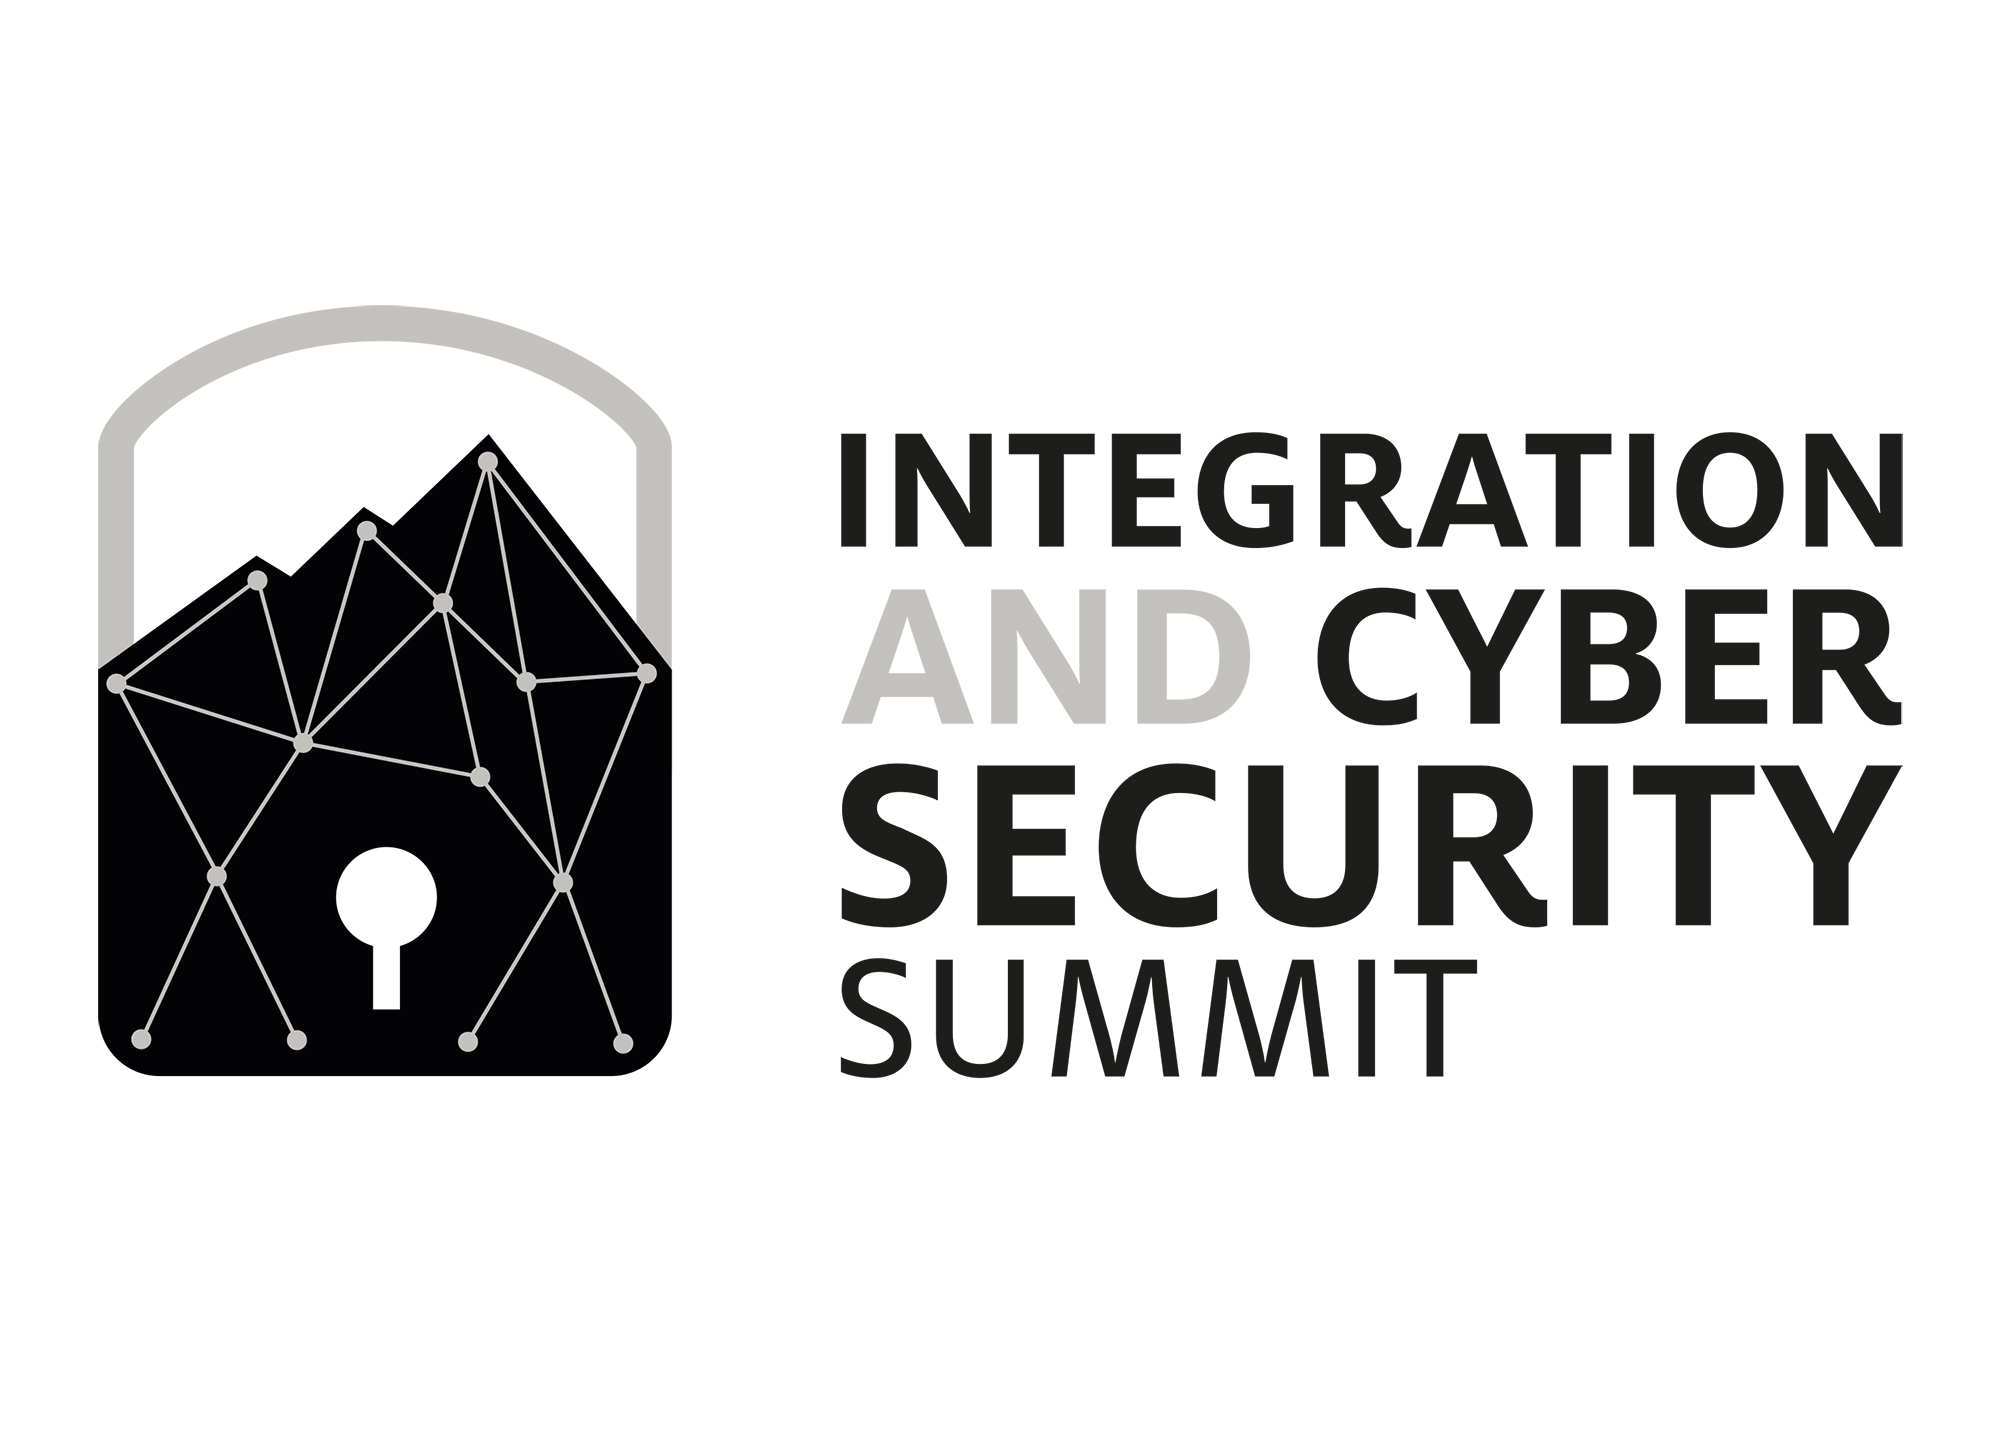 INTEGRATION AND CYBER SECURITY SUMMIT